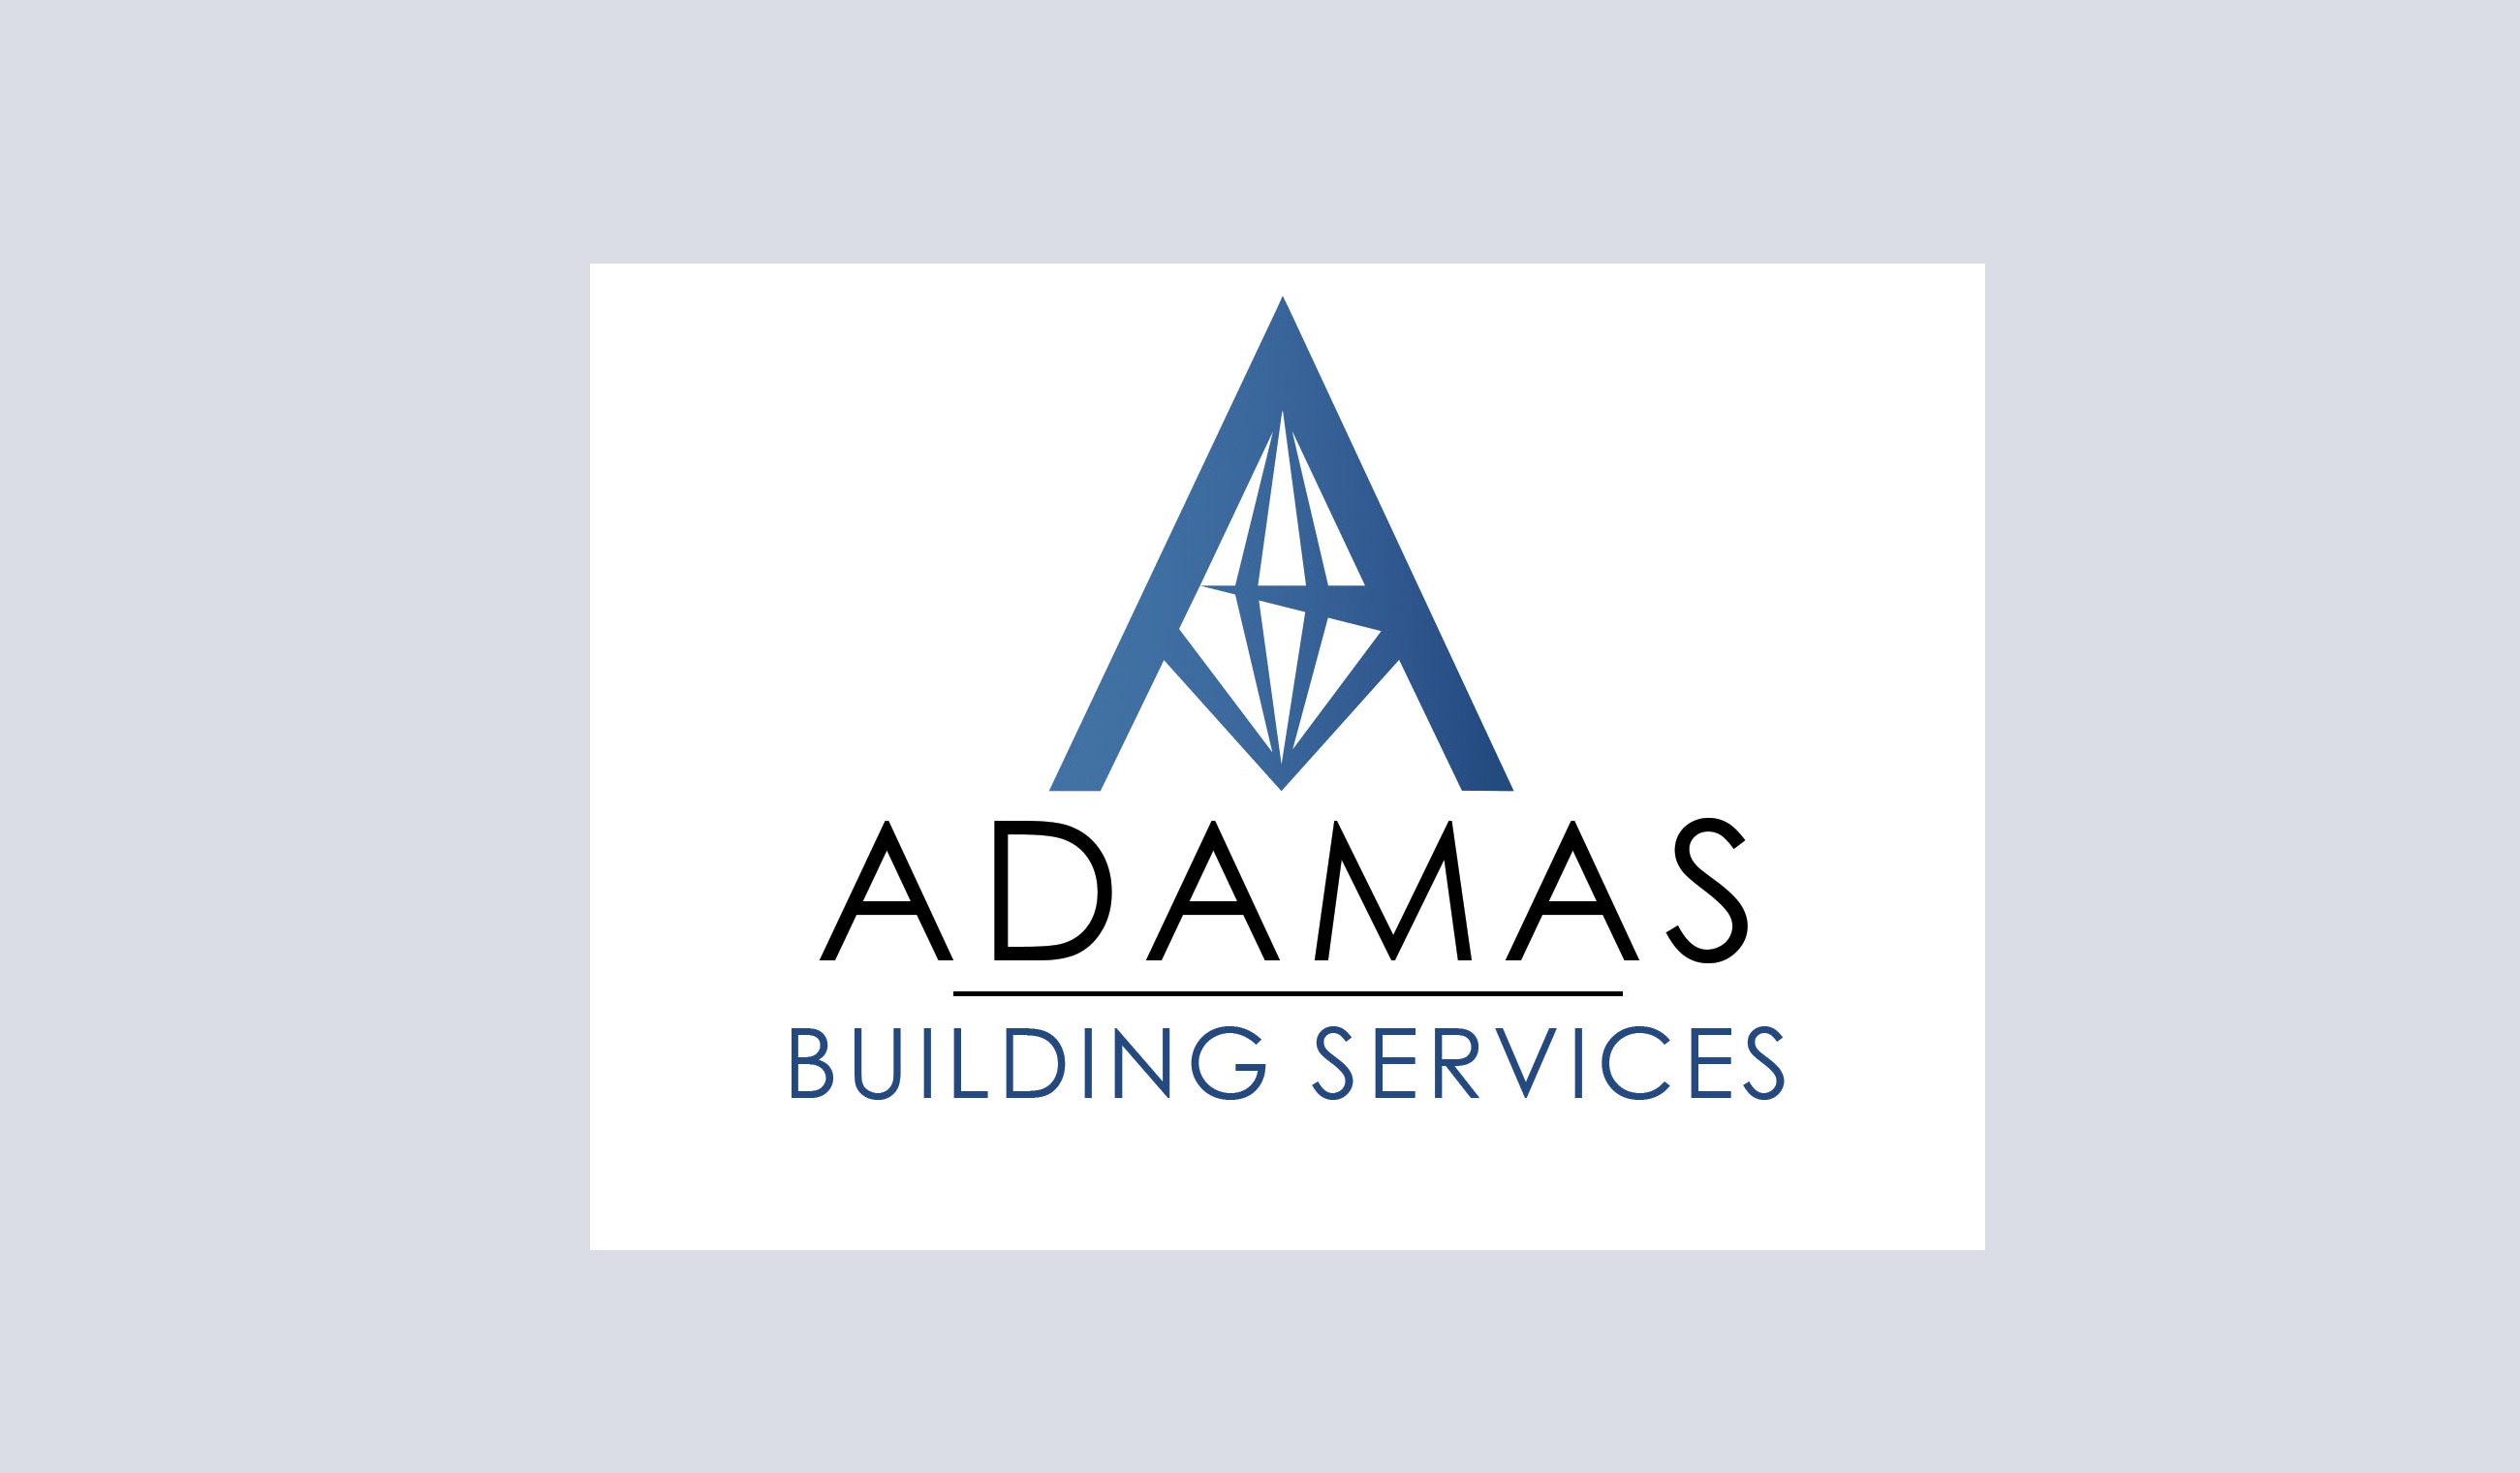 Adamas Building Services: Elevating Property Management Solutions Nationwide